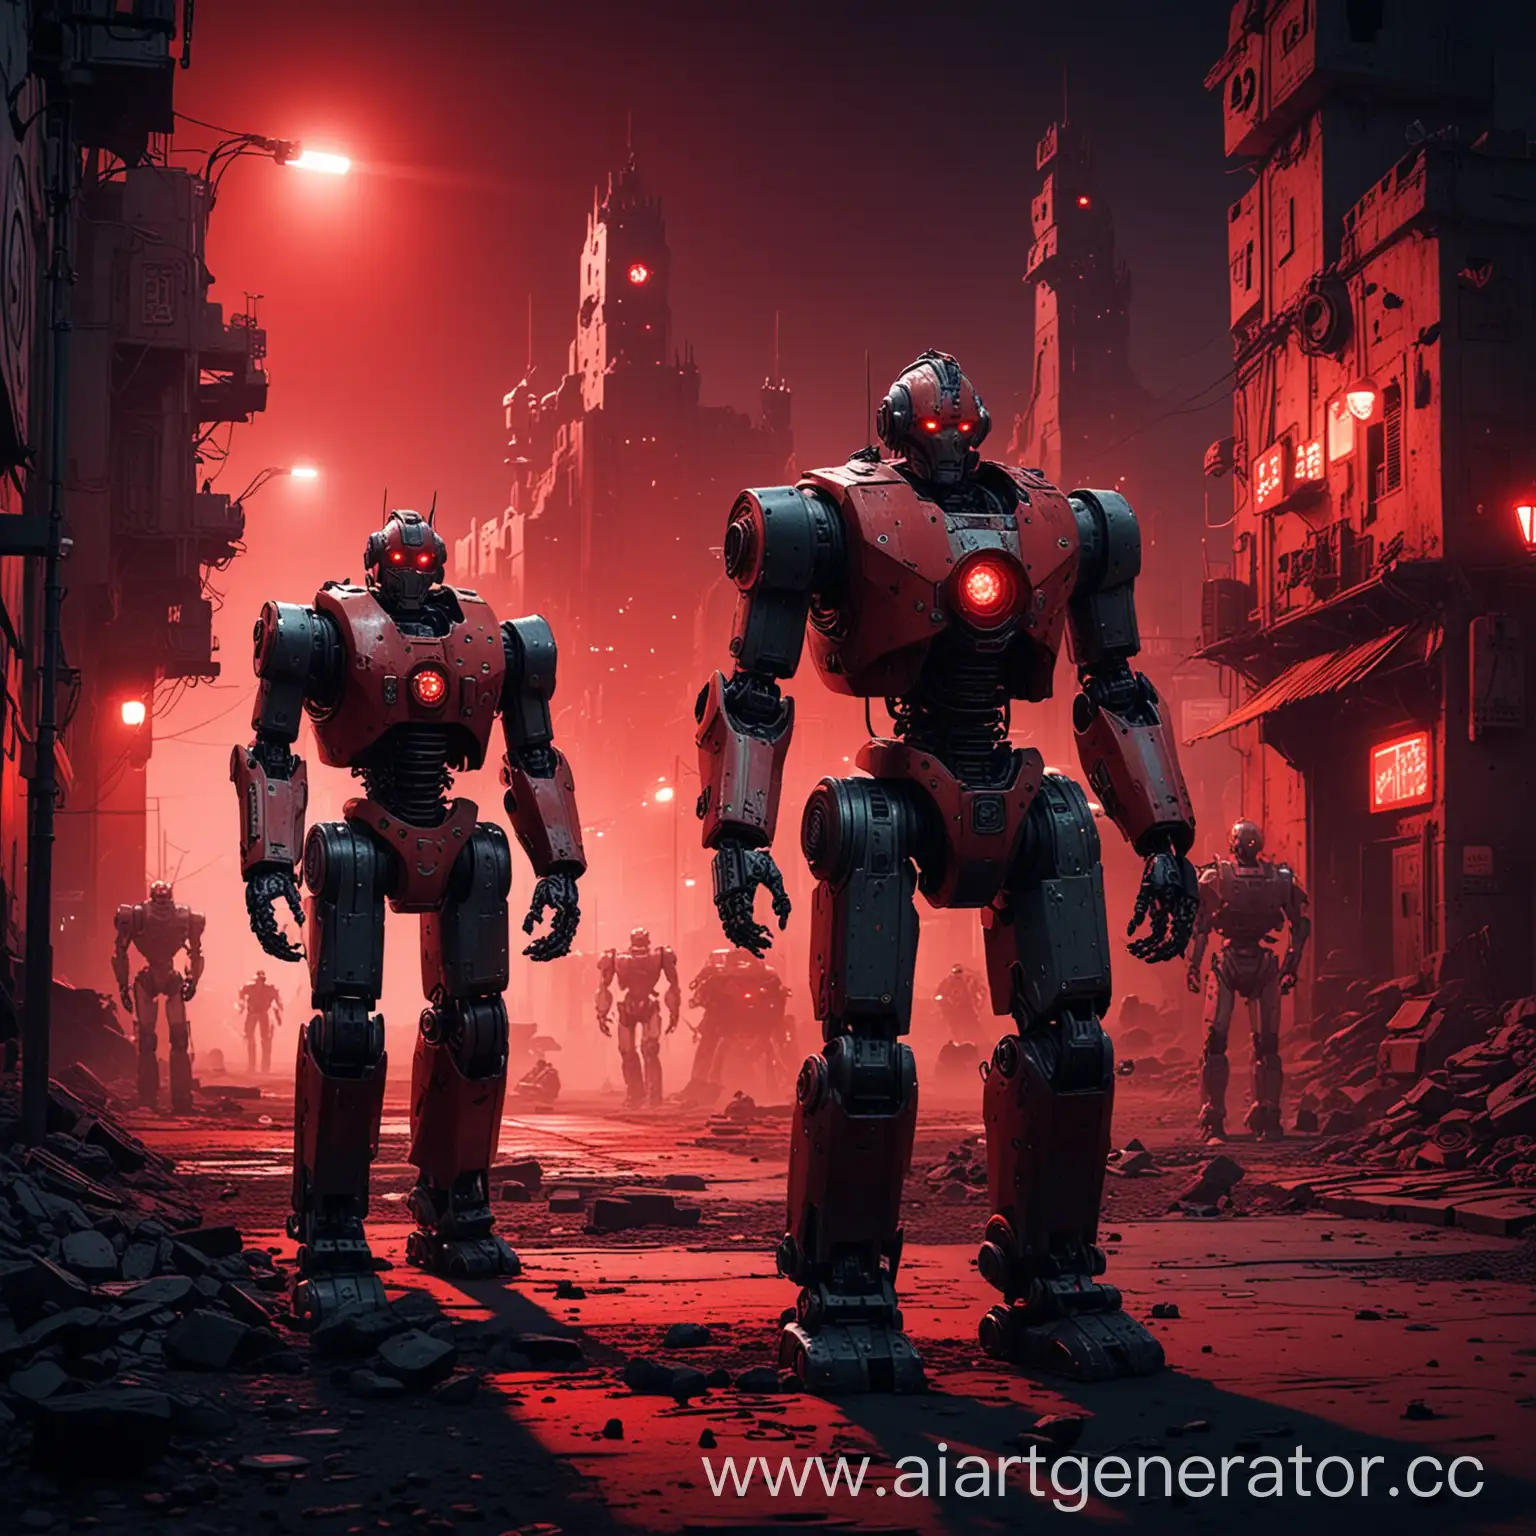 Robot-Guardians-Stand-Vigil-by-the-RedLit-Citadel-at-Night